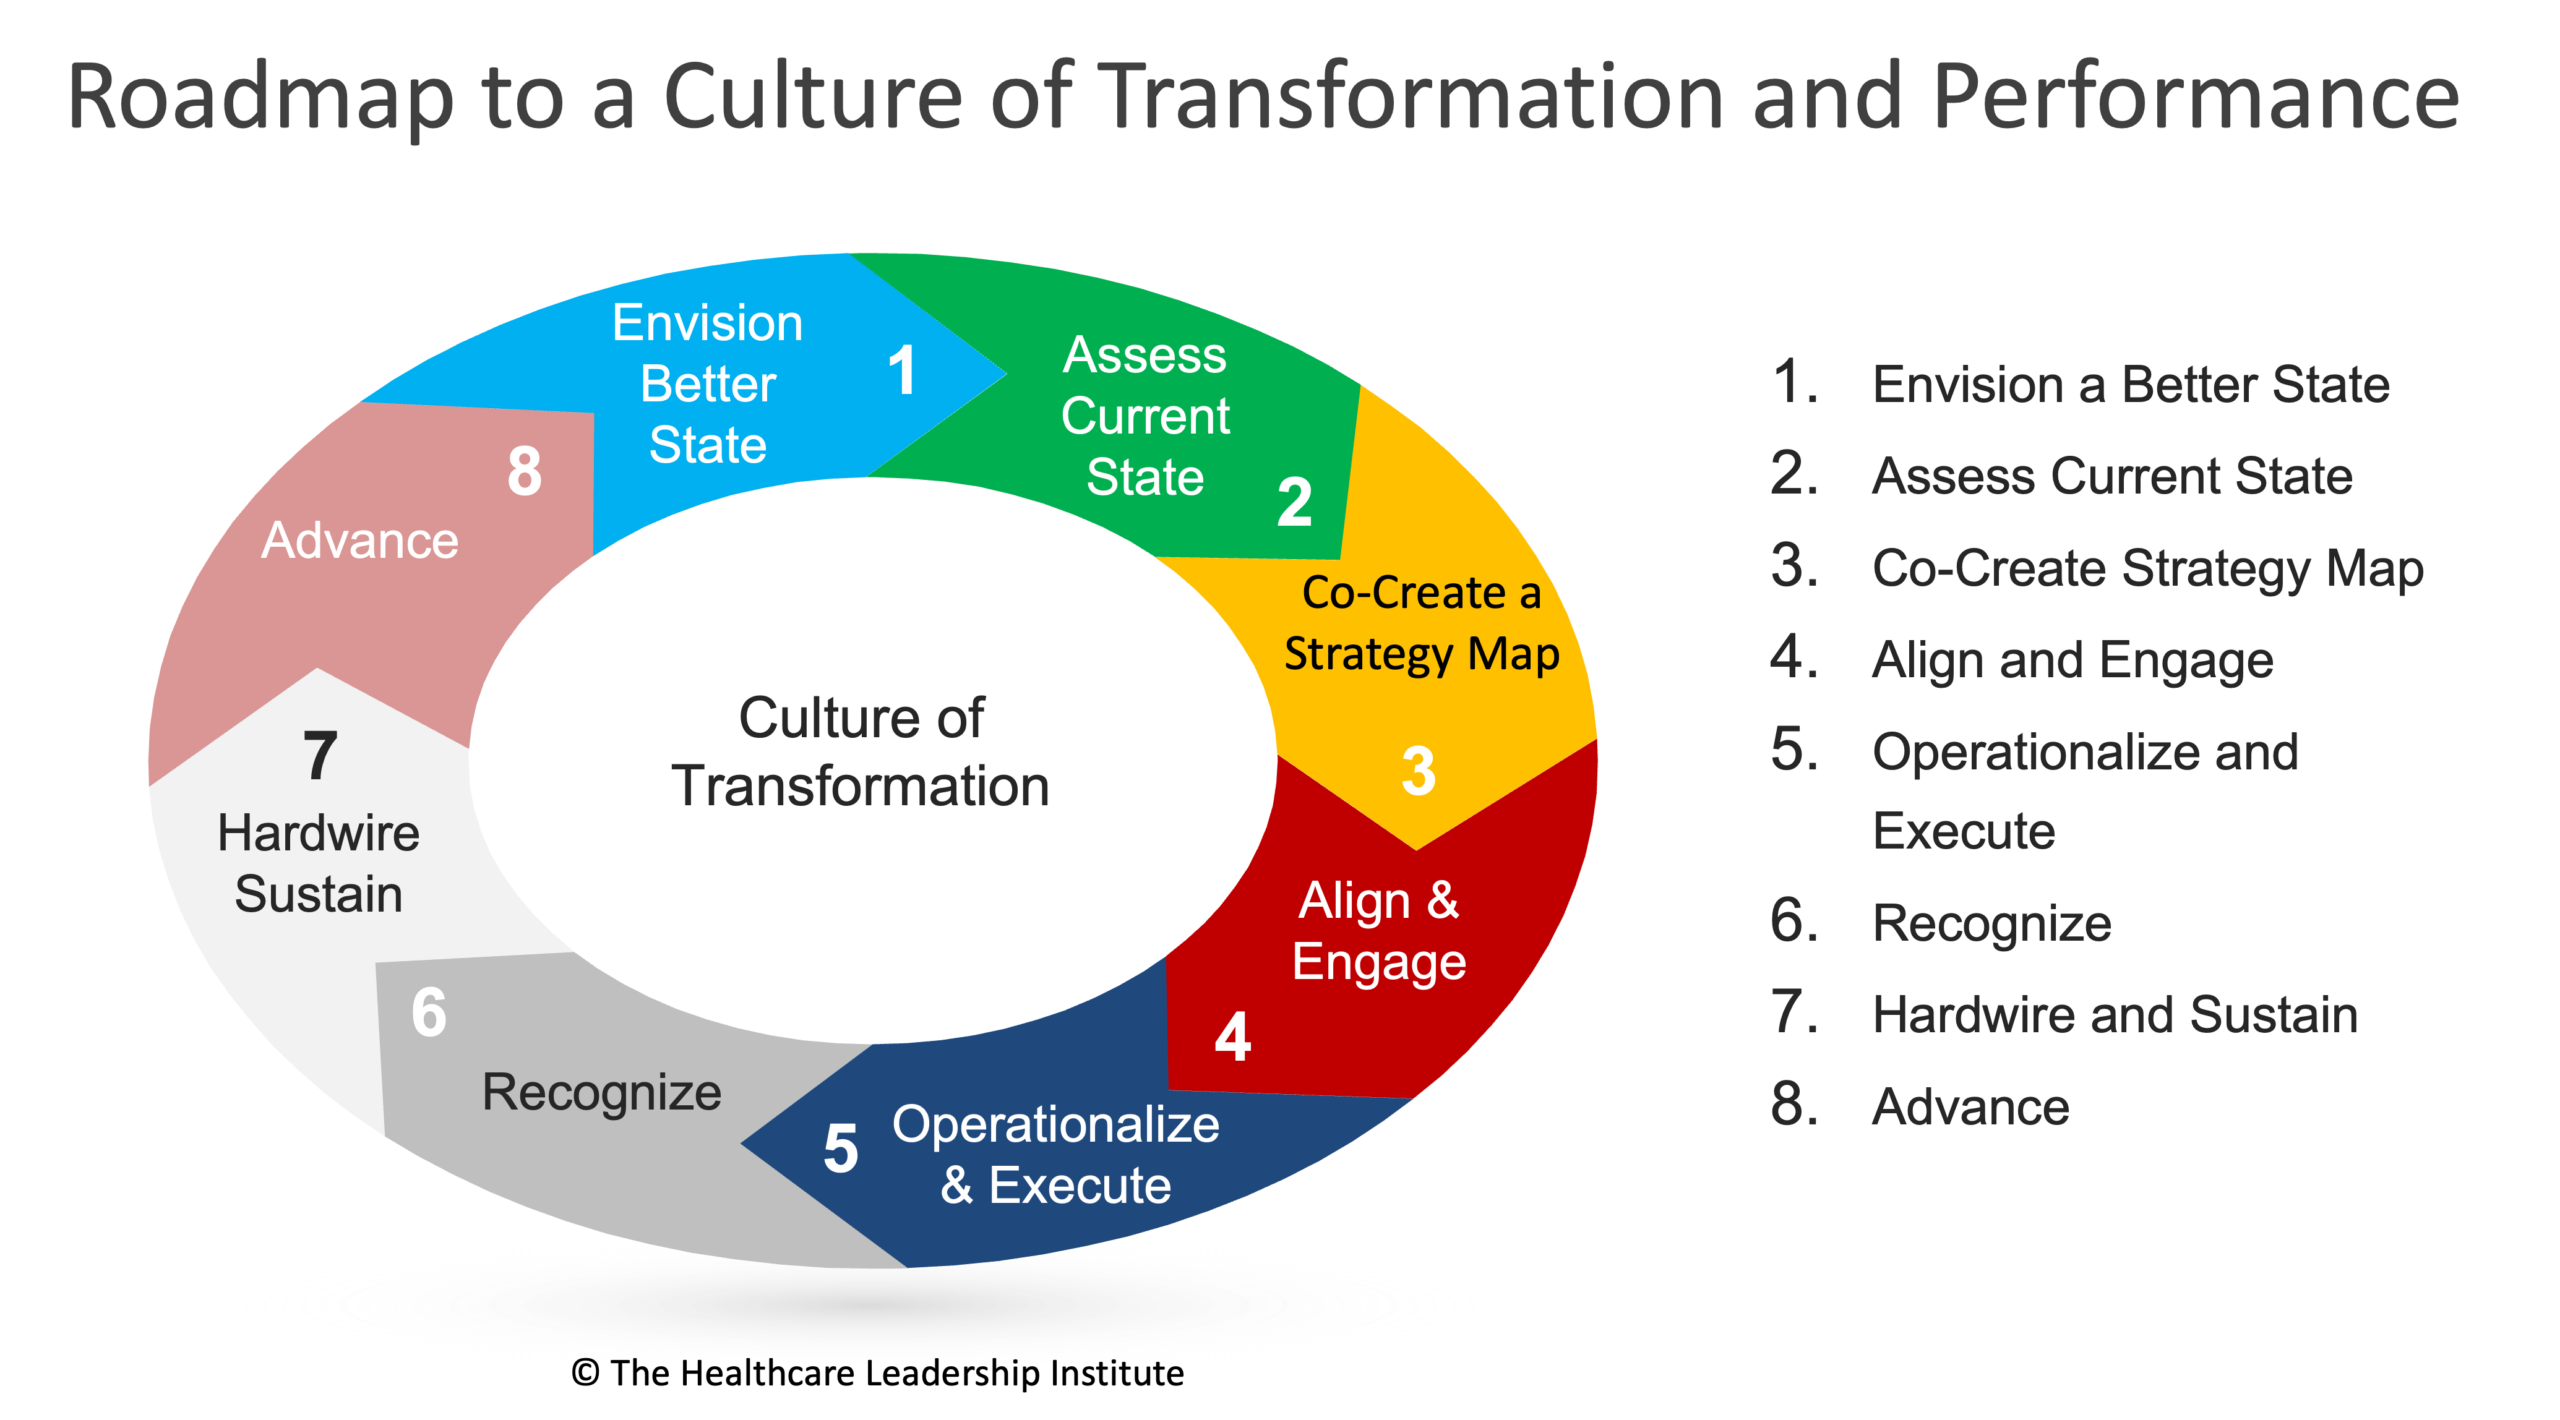 Culture of Transformation Image